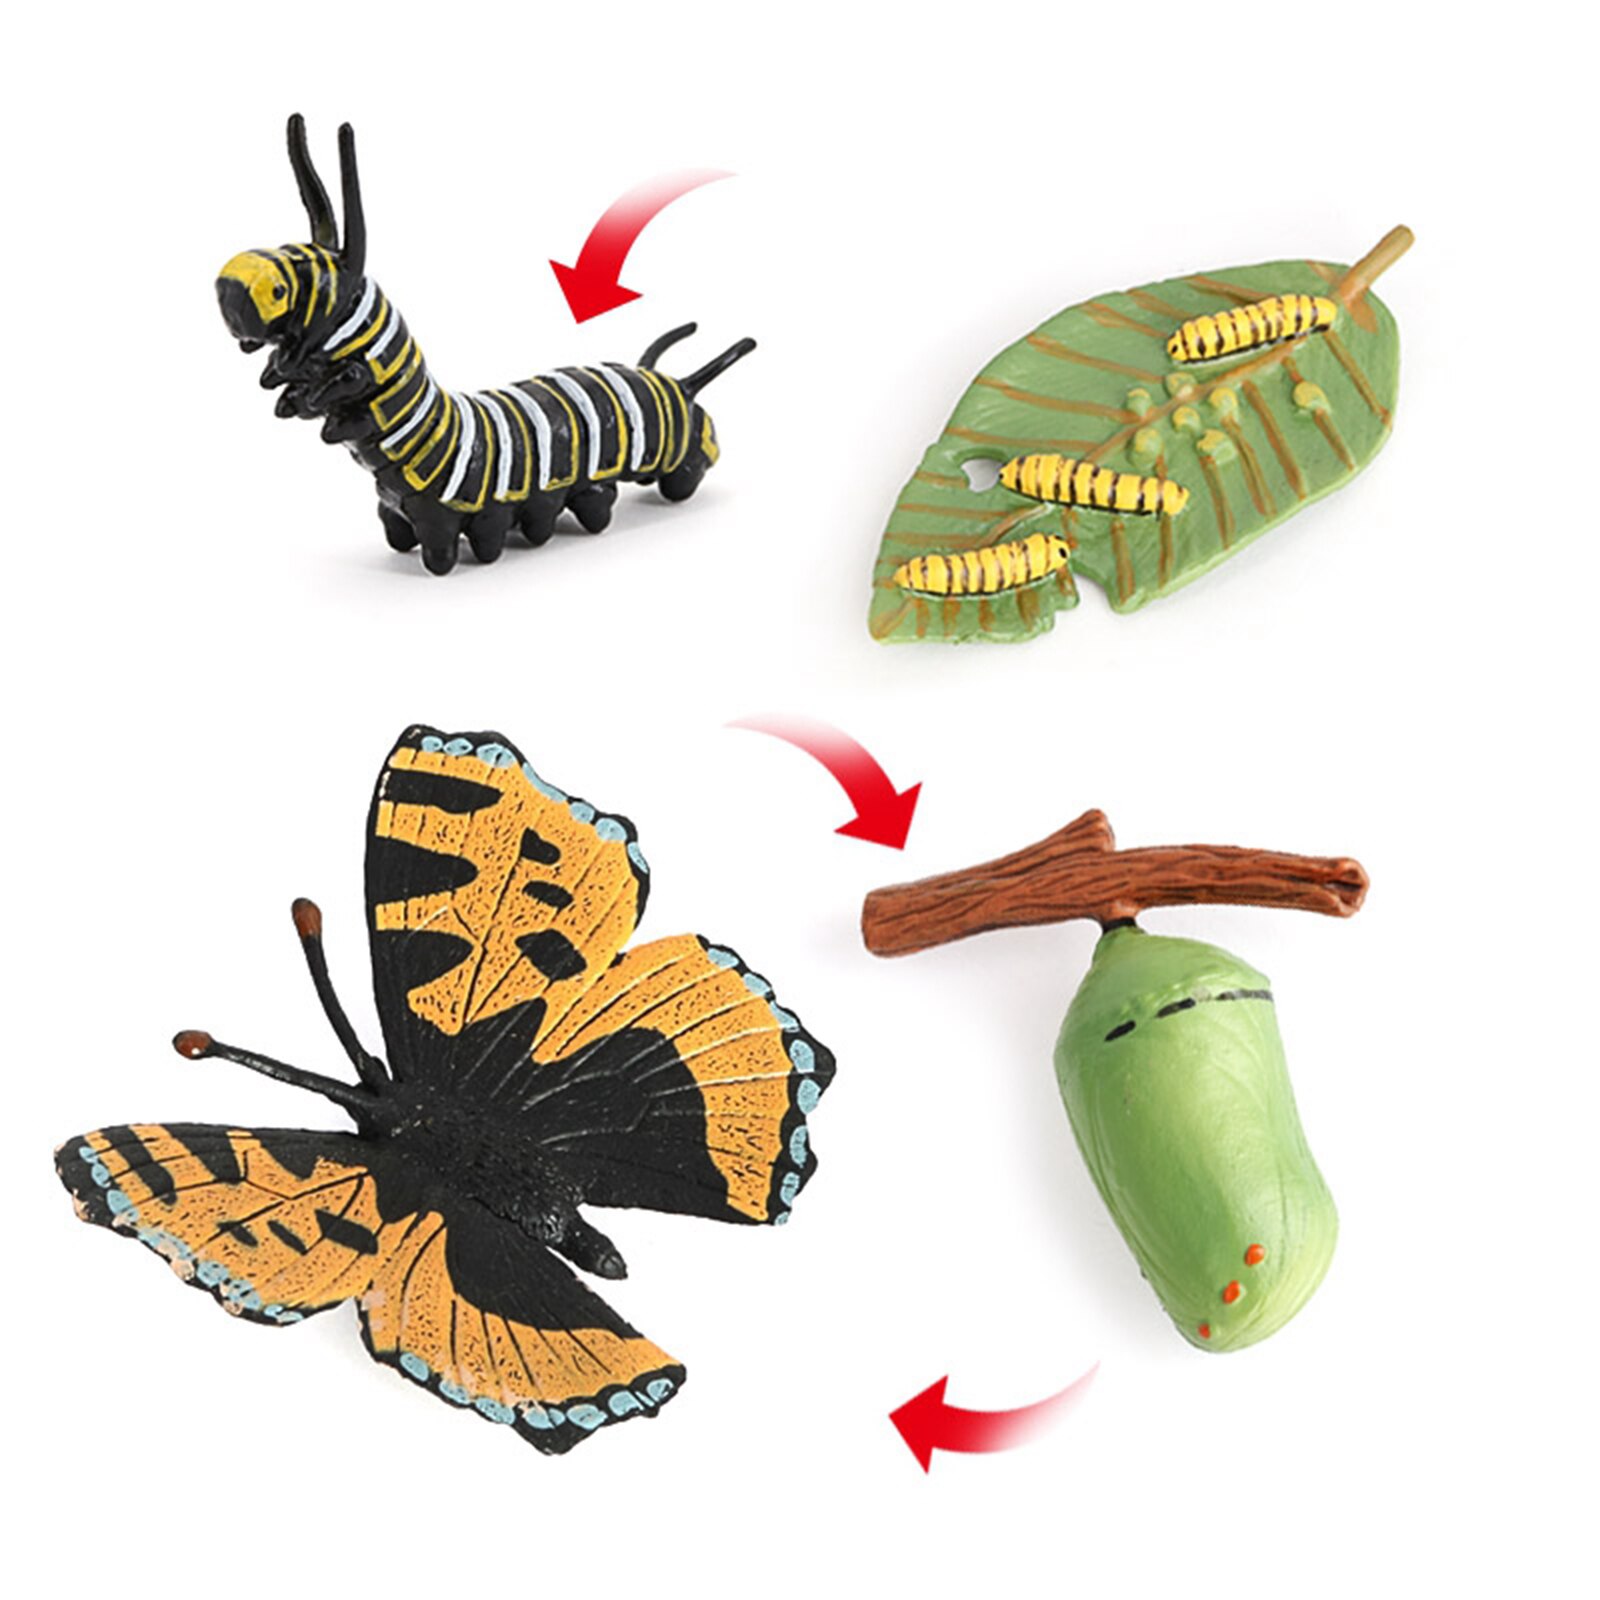 Life Cycle of a Monarch Butterfly， Nature Insects Life Cycles Growth Model Game Prop，Insect Animal Natural Education Toy